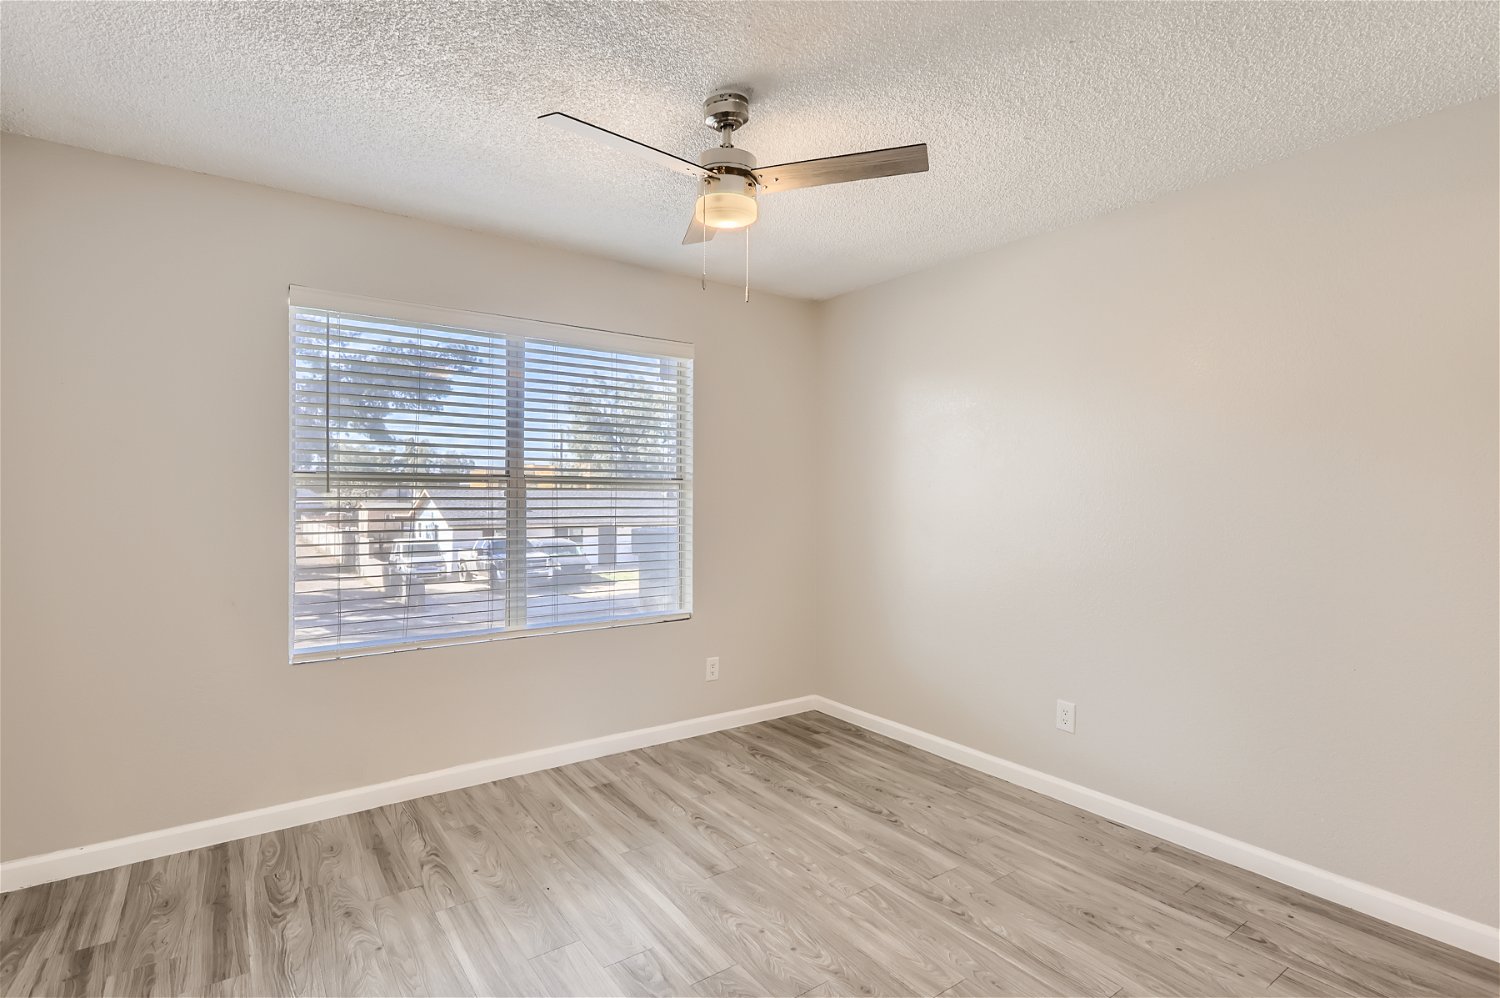 A bedroom with a ceiling fan, a window, and wood-style flooring at Rise Trailside.